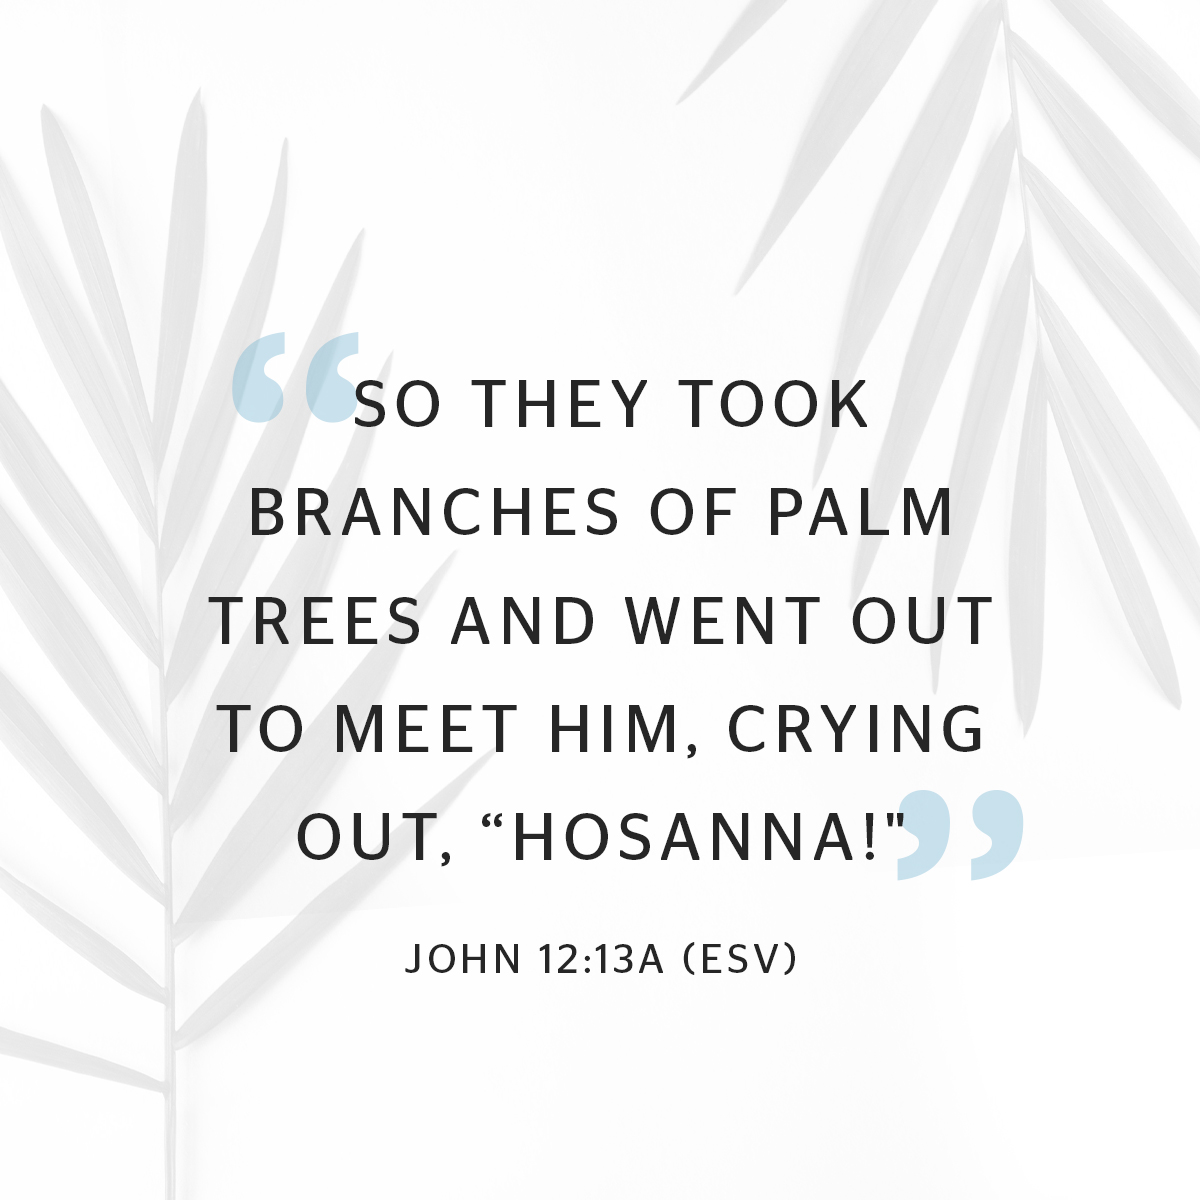 So THEY TOOK BRANCHES OF PALM TREES AND WENT OUT To MEET HIM, CRYING OUT, HOSANNAI" ) 9 JOHN 12.13A (ESV)